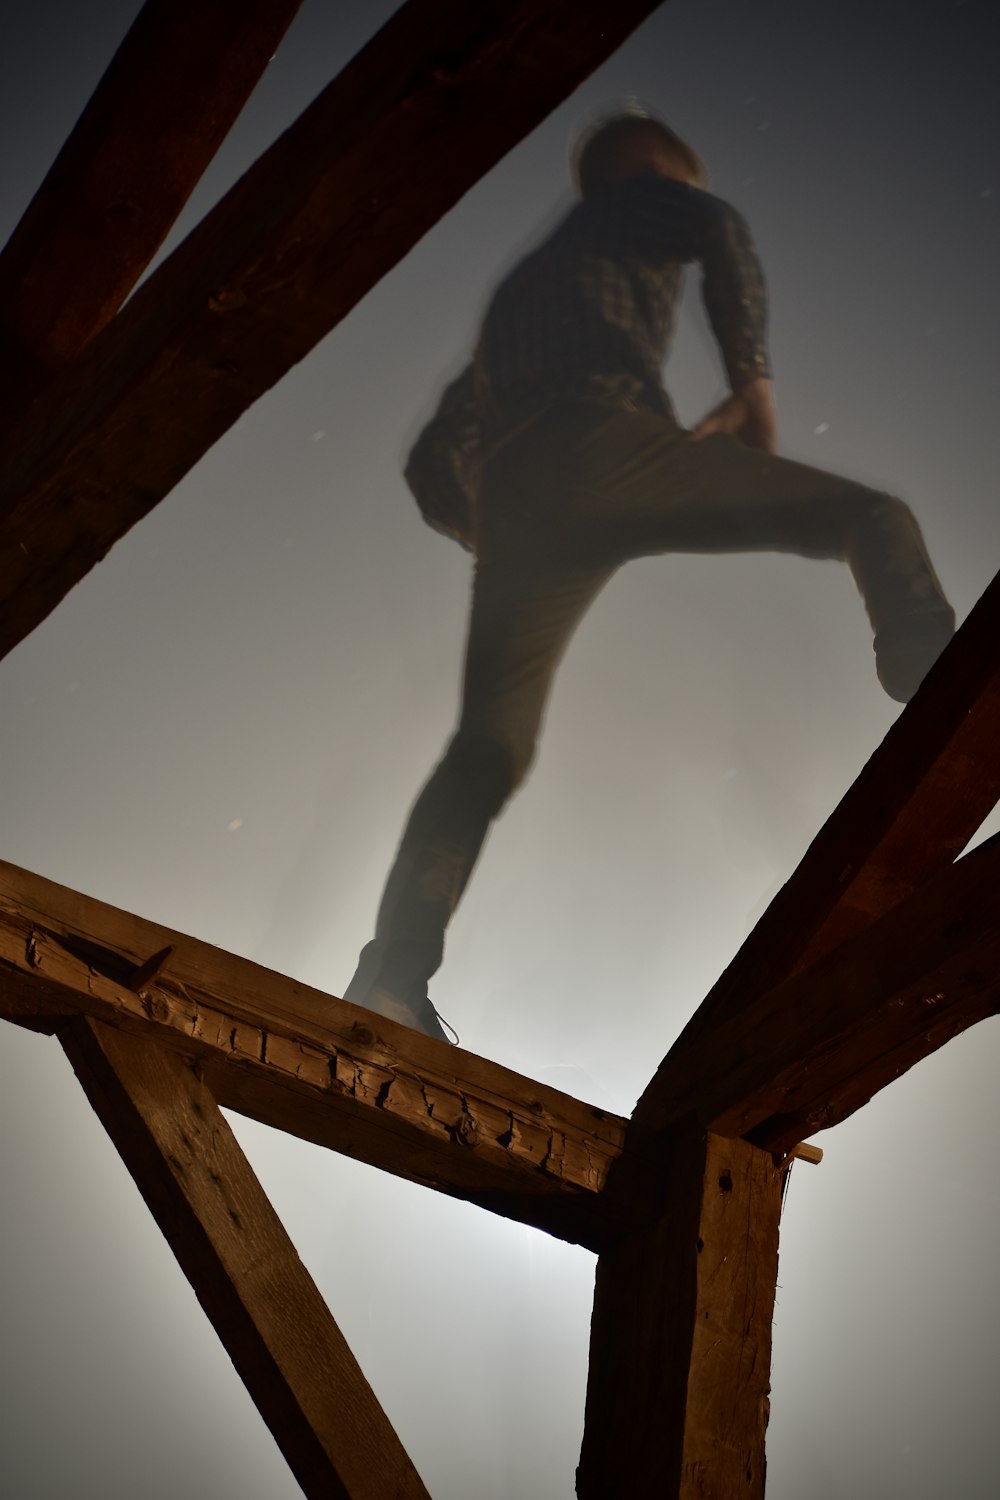 woman in black tank top and black pants climbing on brown wooden ladder